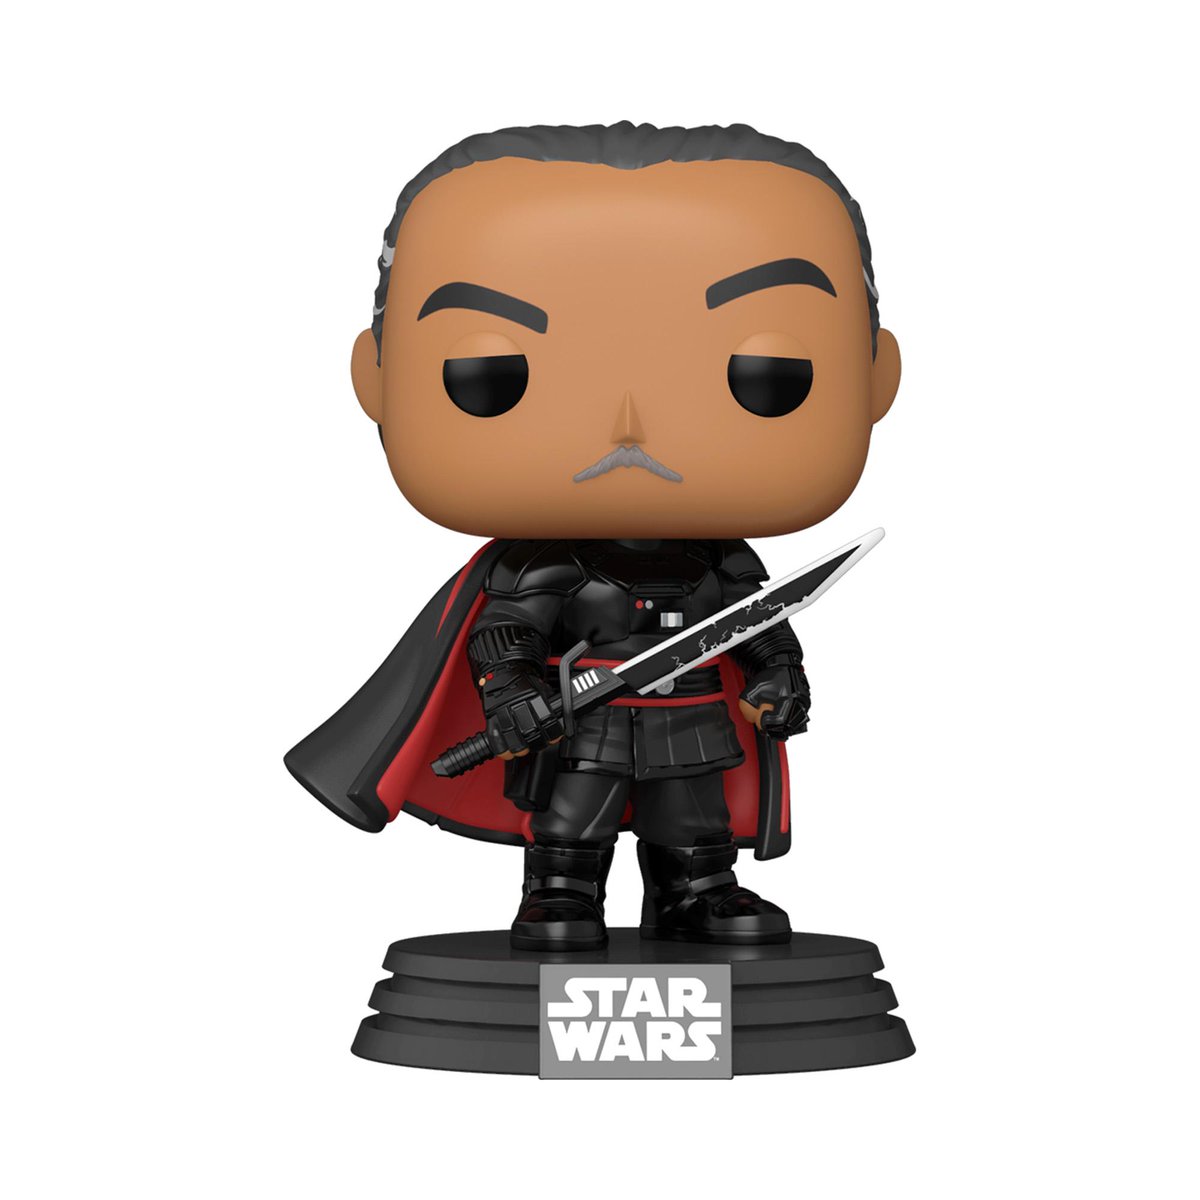 RT & follow @OriginalFunko for the chance to WIN this Target exclusive Moff Gideon Pop! bit.ly/2VRDhcM #FunkoGiveaway #Funko #TheMandalorian